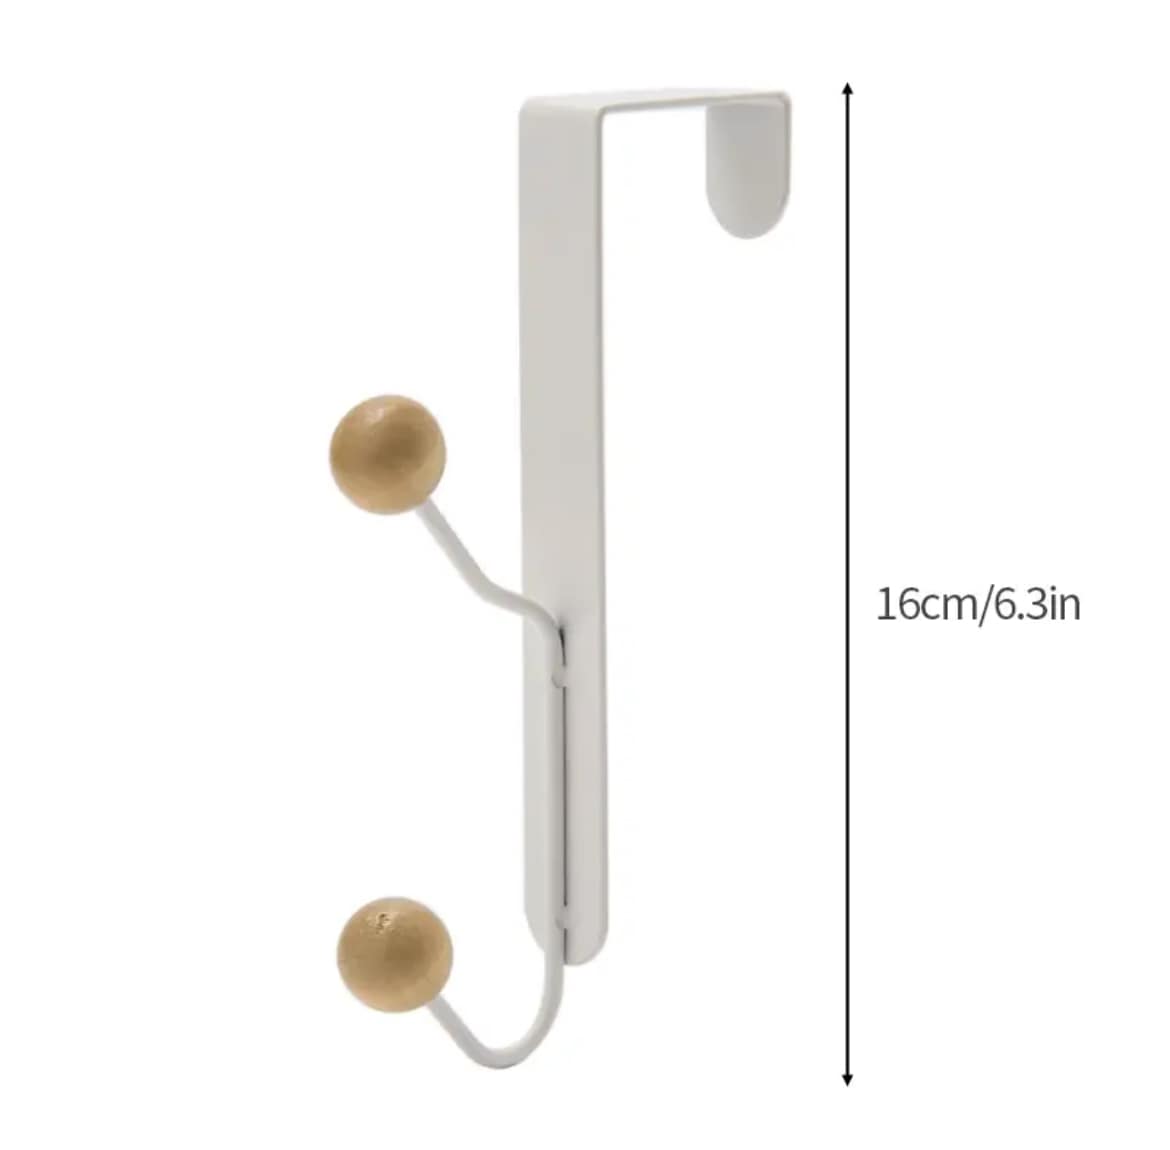 Retro-chic wall hanger organizer crafted from wood, perfect for Nordic-inspired interiors.